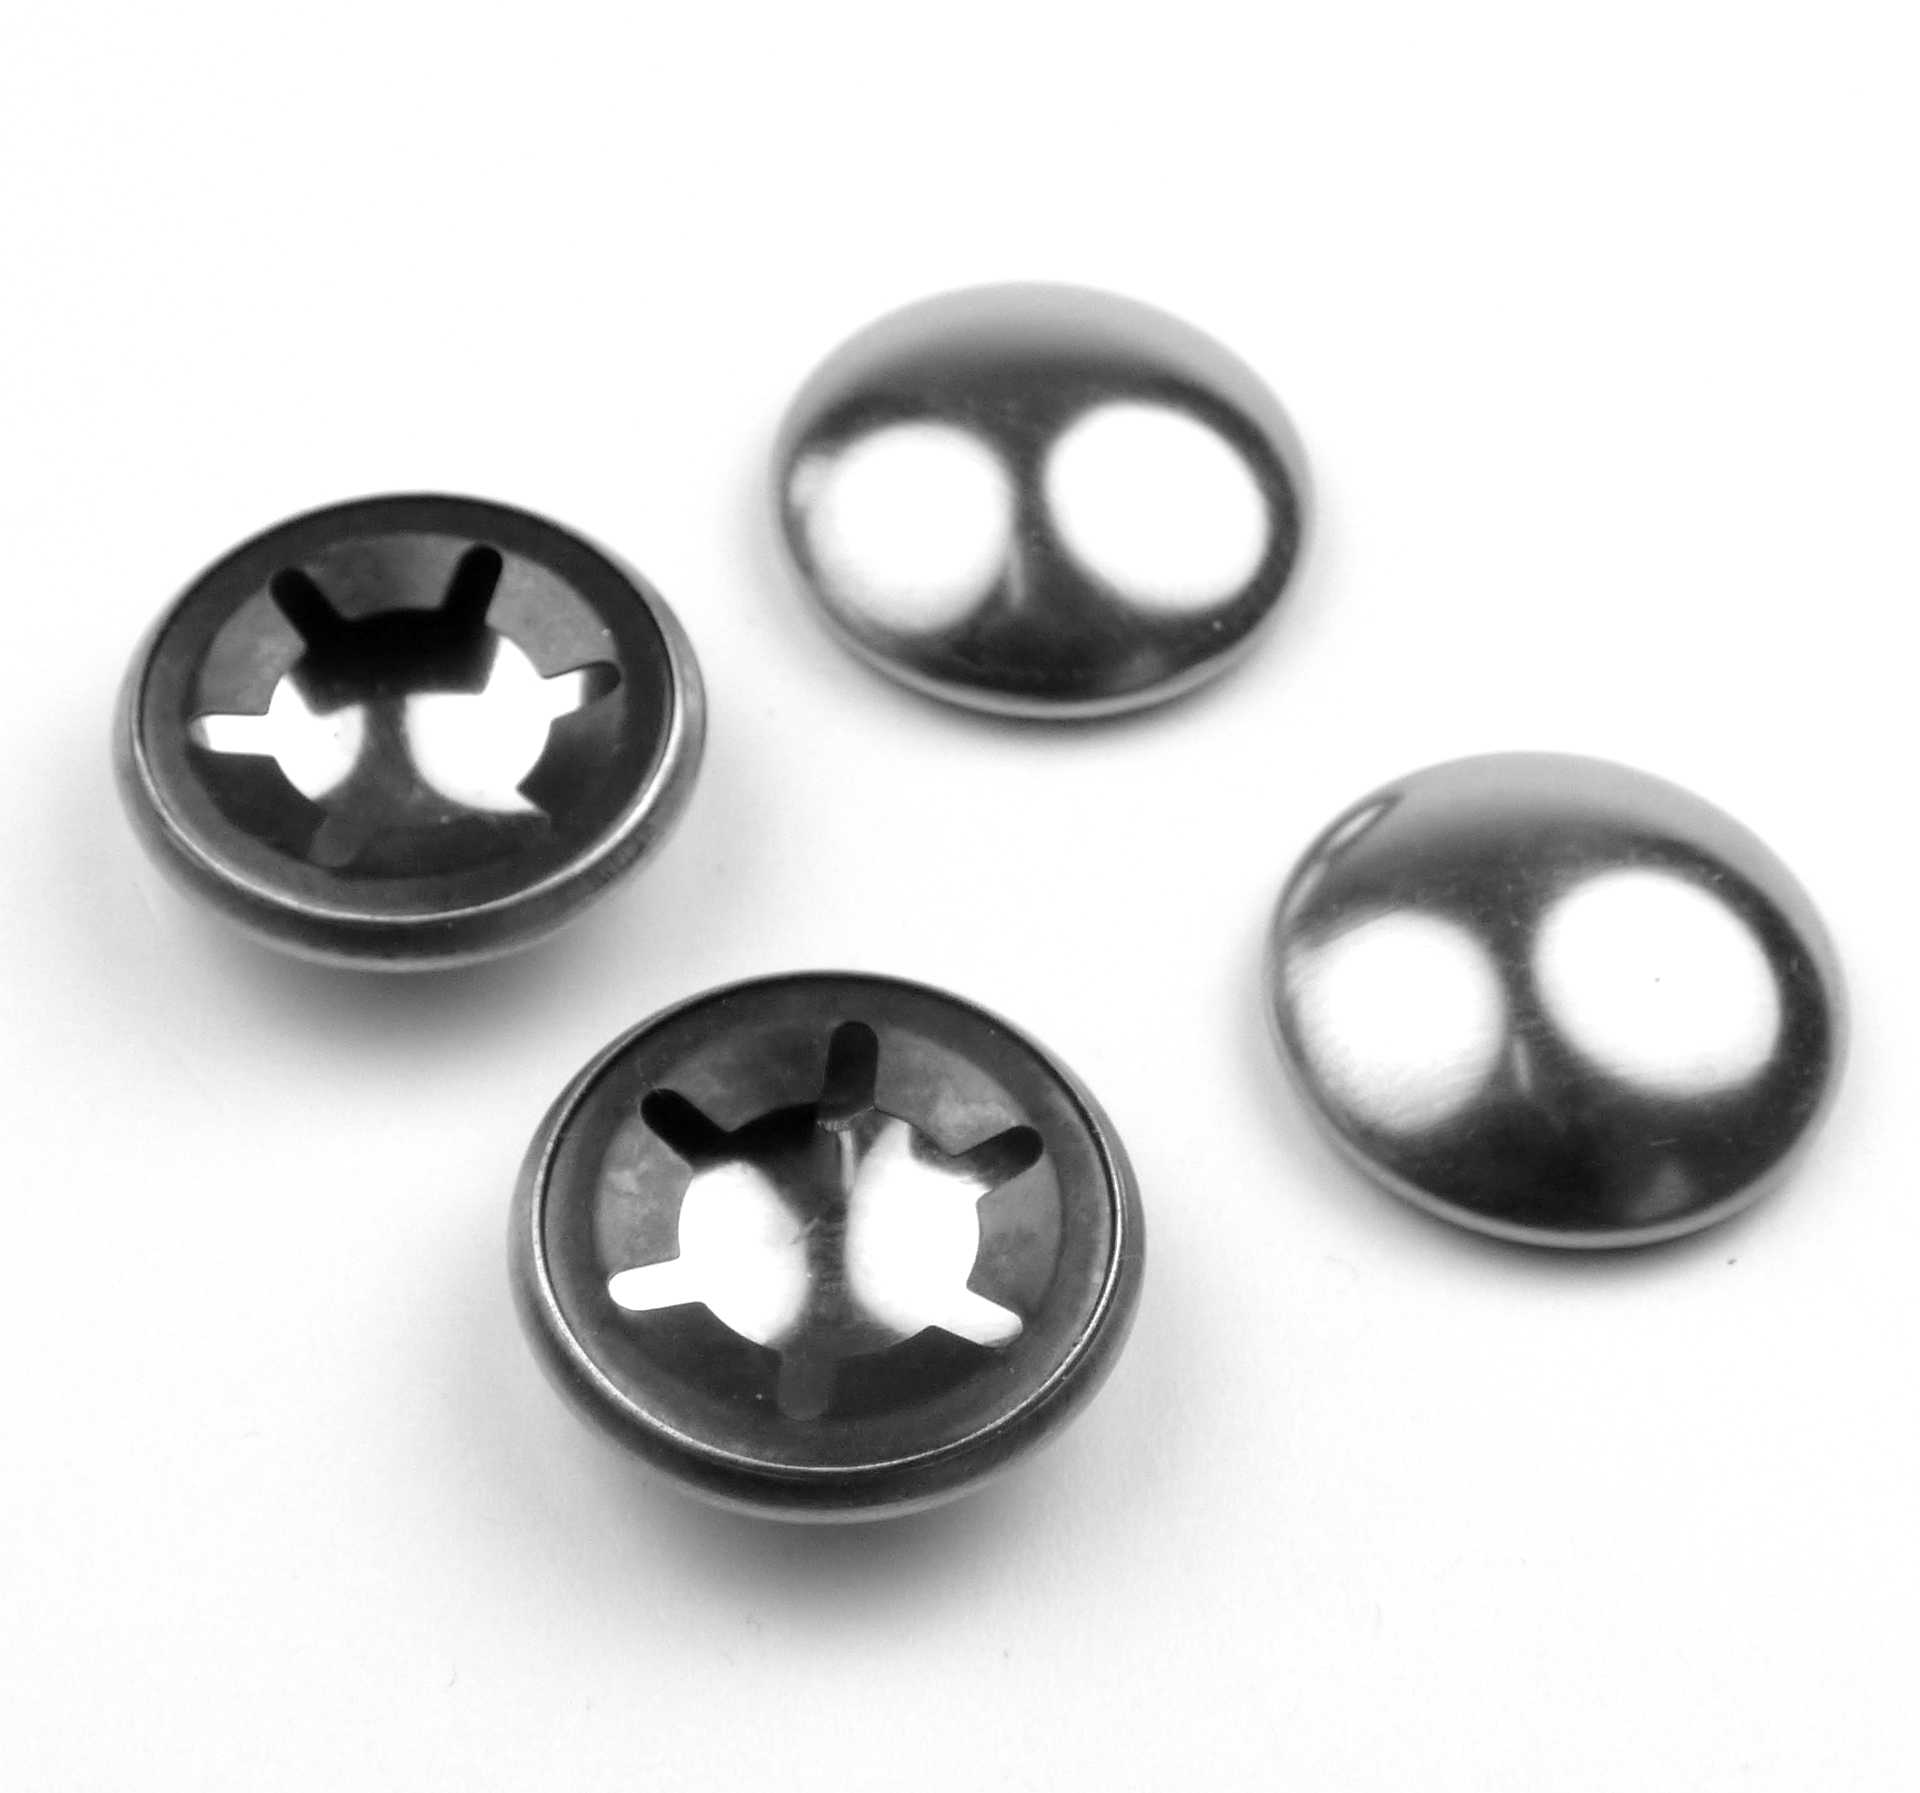 Spring Caps For Model Wheels and Axles | Hobbies